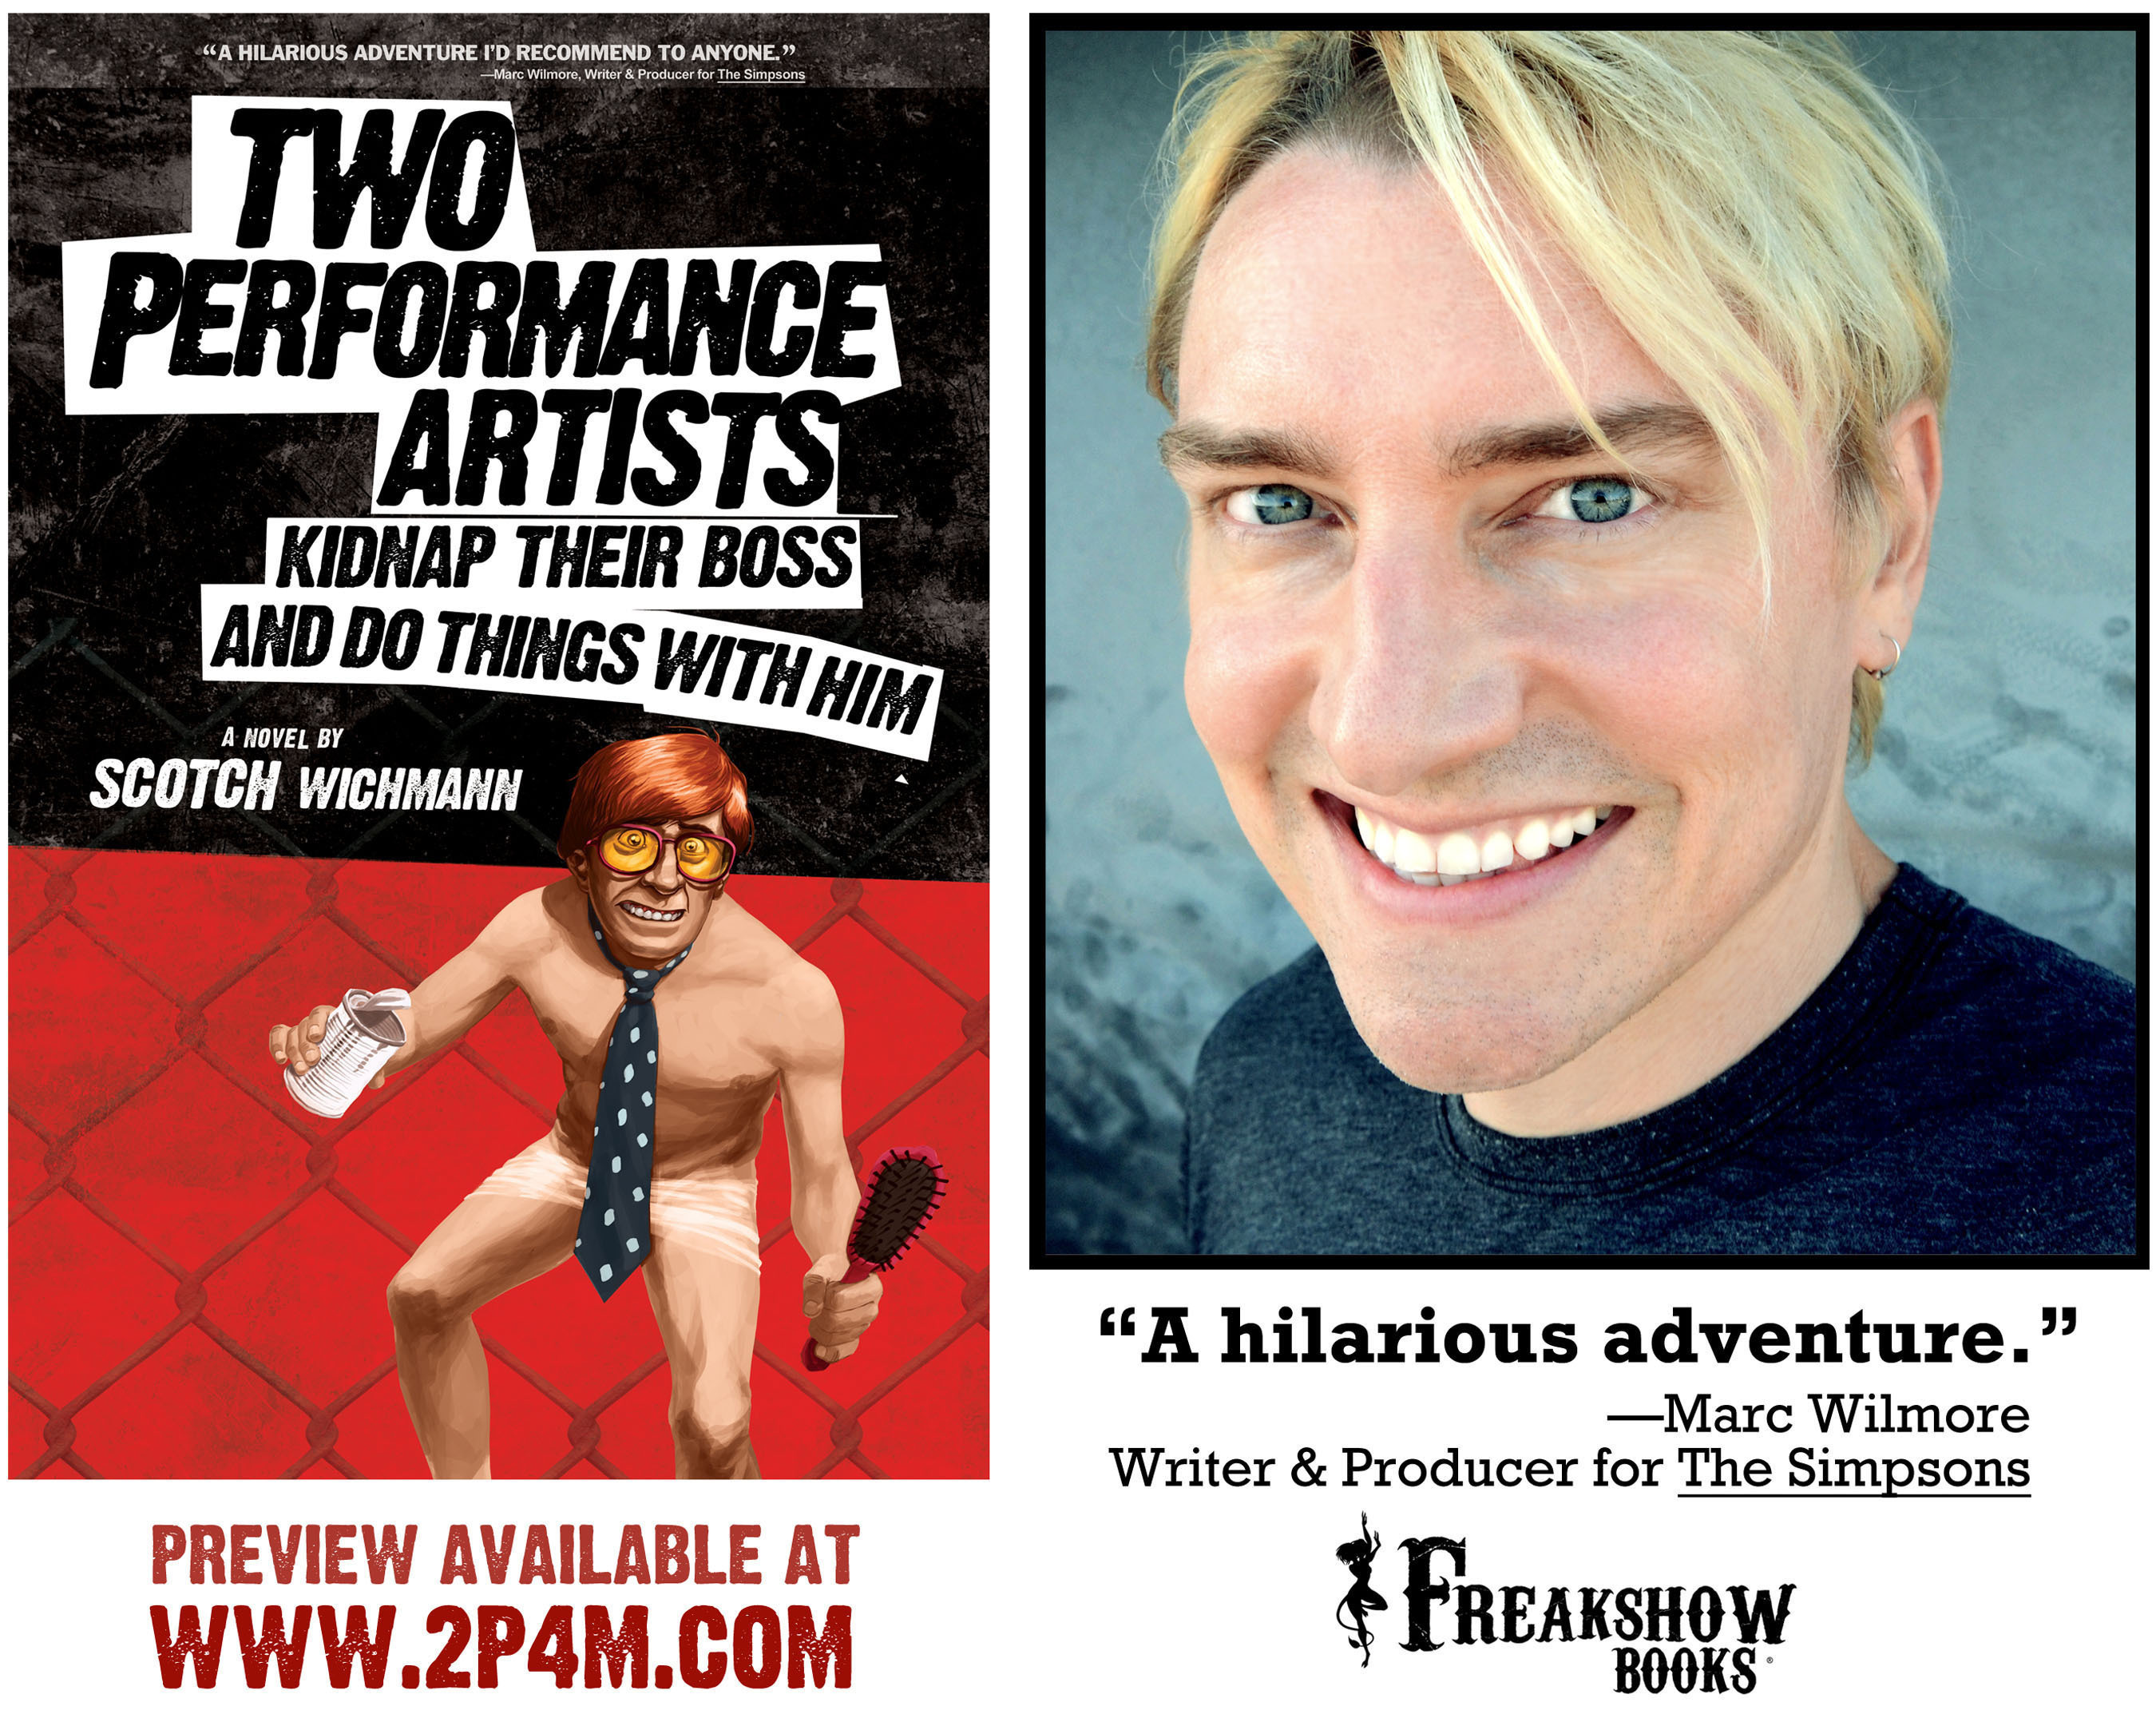 Debut novel TWO PERFORMANCE ARTISTS KIDNAP THEIR BOSS AND DO THINGS WITH HIM by Scotch Wichmann, to be published by Freakshow Books(R). (PRNewsFoto/Freakshow Books) (PRNewsFoto/FREAKSHOW BOOKS)